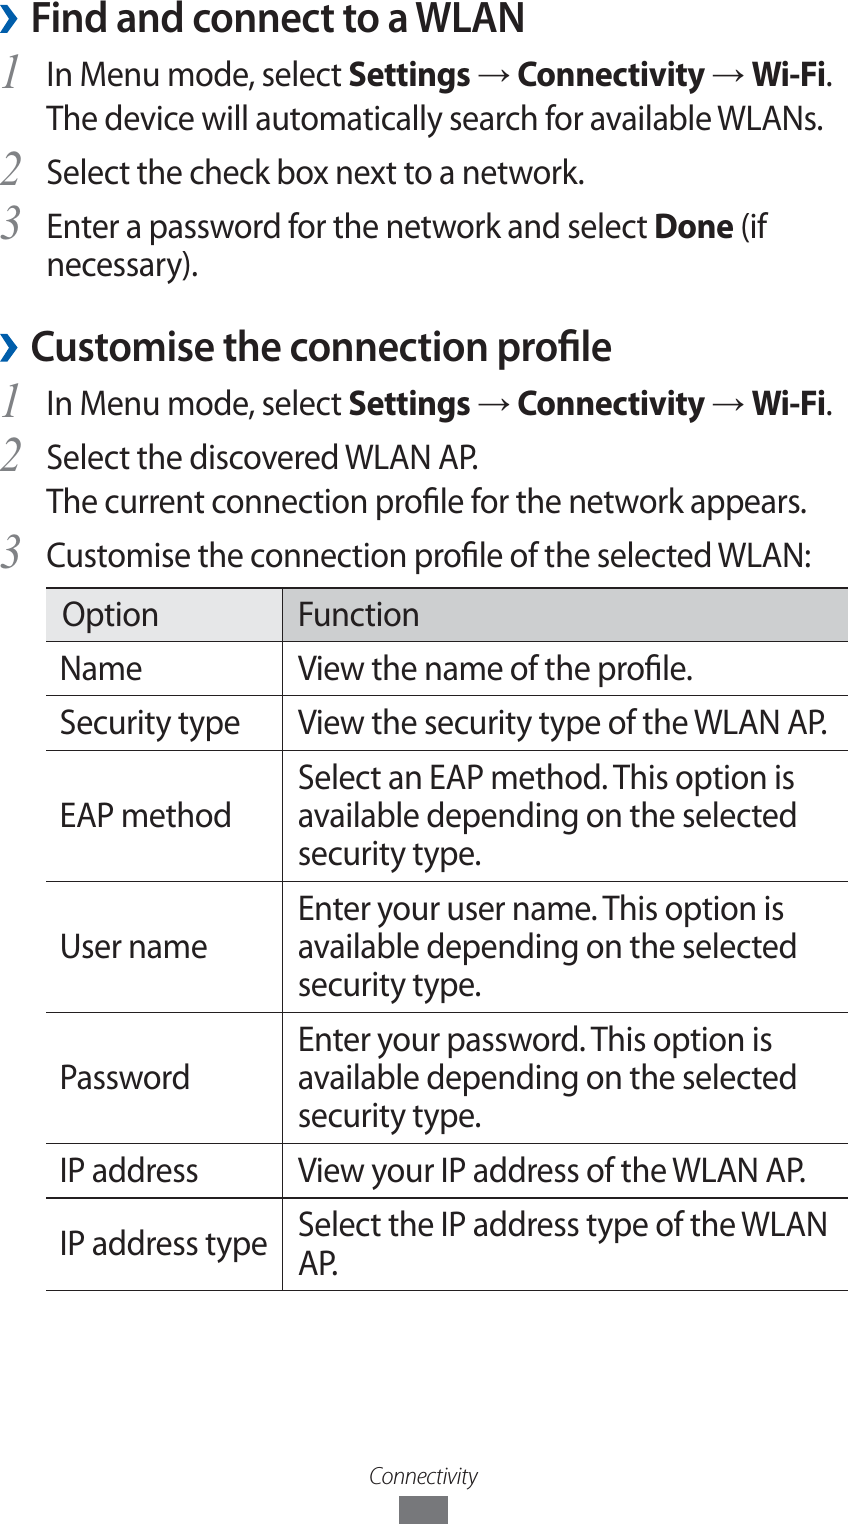 Connectivity ›Find and connect to a WLANIn Menu mode, select 1 Settings → Connectivity → Wi-Fi. The device will automatically search for available WLANs. Select the check box next to a network.2 Enter a password for the network and select 3 Done (if necessary).Customise the connection prole ›In Menu mode, select 1 Settings → Connectivity → Wi-Fi.Select the discovered WLAN AP. 2 The current connection prole for the network appears.Customise the connection prole of the selected WLAN:3 Option FunctionName View the name of the prole.Security type View the security type of the WLAN AP.EAP methodSelect an EAP method. This option is available depending on the selected security type.User nameEnter your user name. This option is available depending on the selected security type.PasswordEnter your password. This option is available depending on the selected security type.IP address View your IP address of the WLAN AP.IP address type Select the IP address type of the WLAN AP.